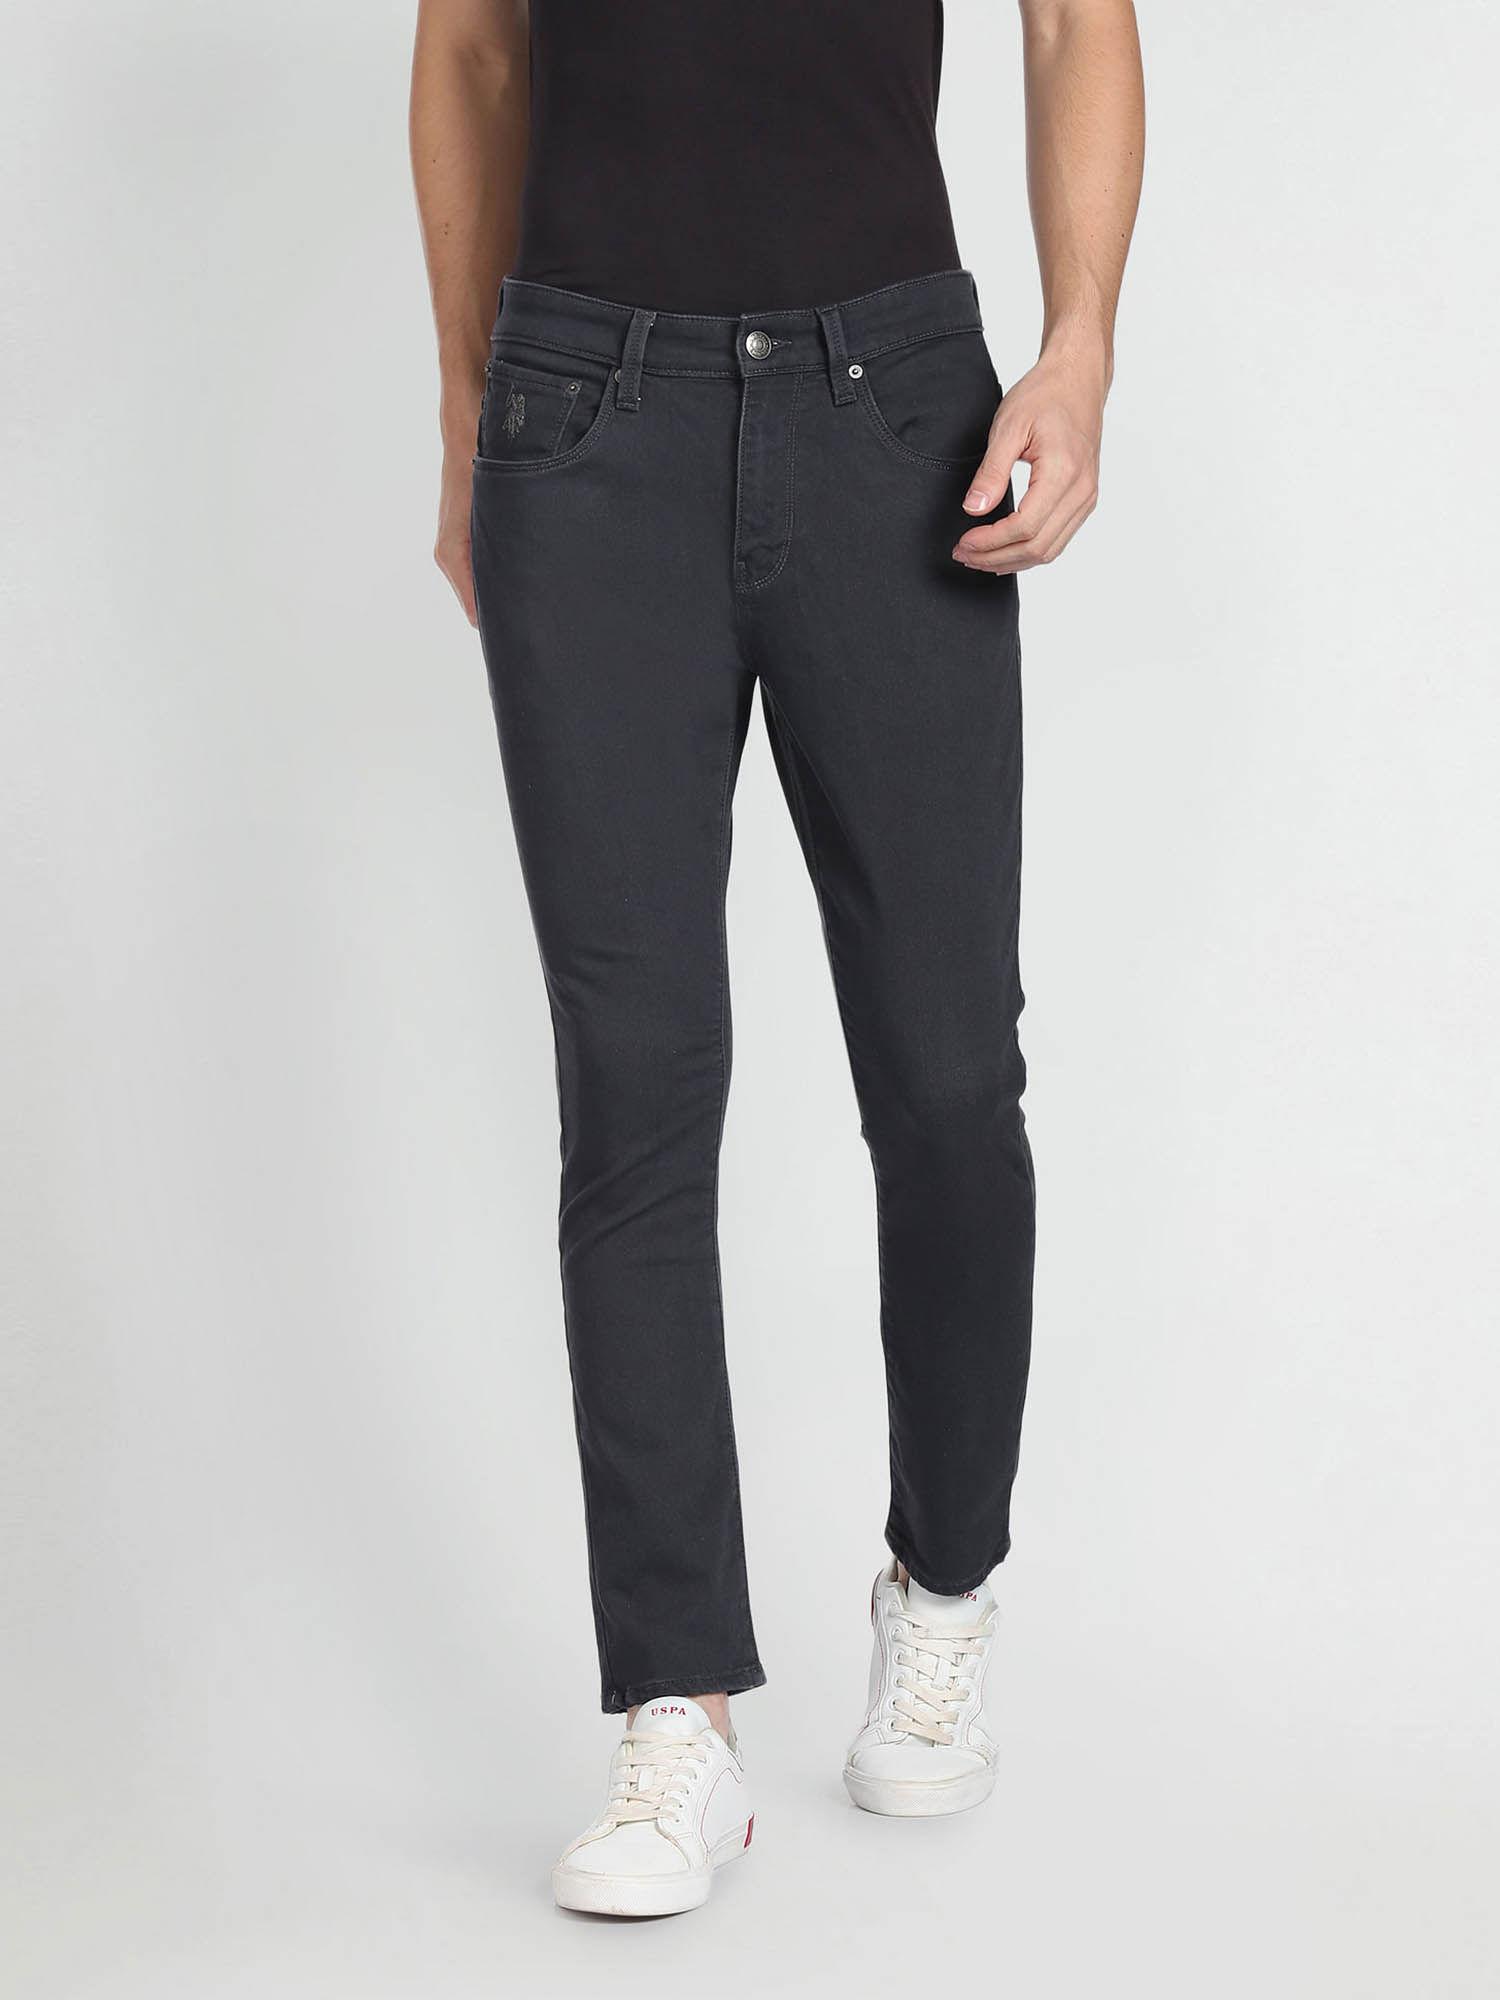 henry cropped rinsed jeans